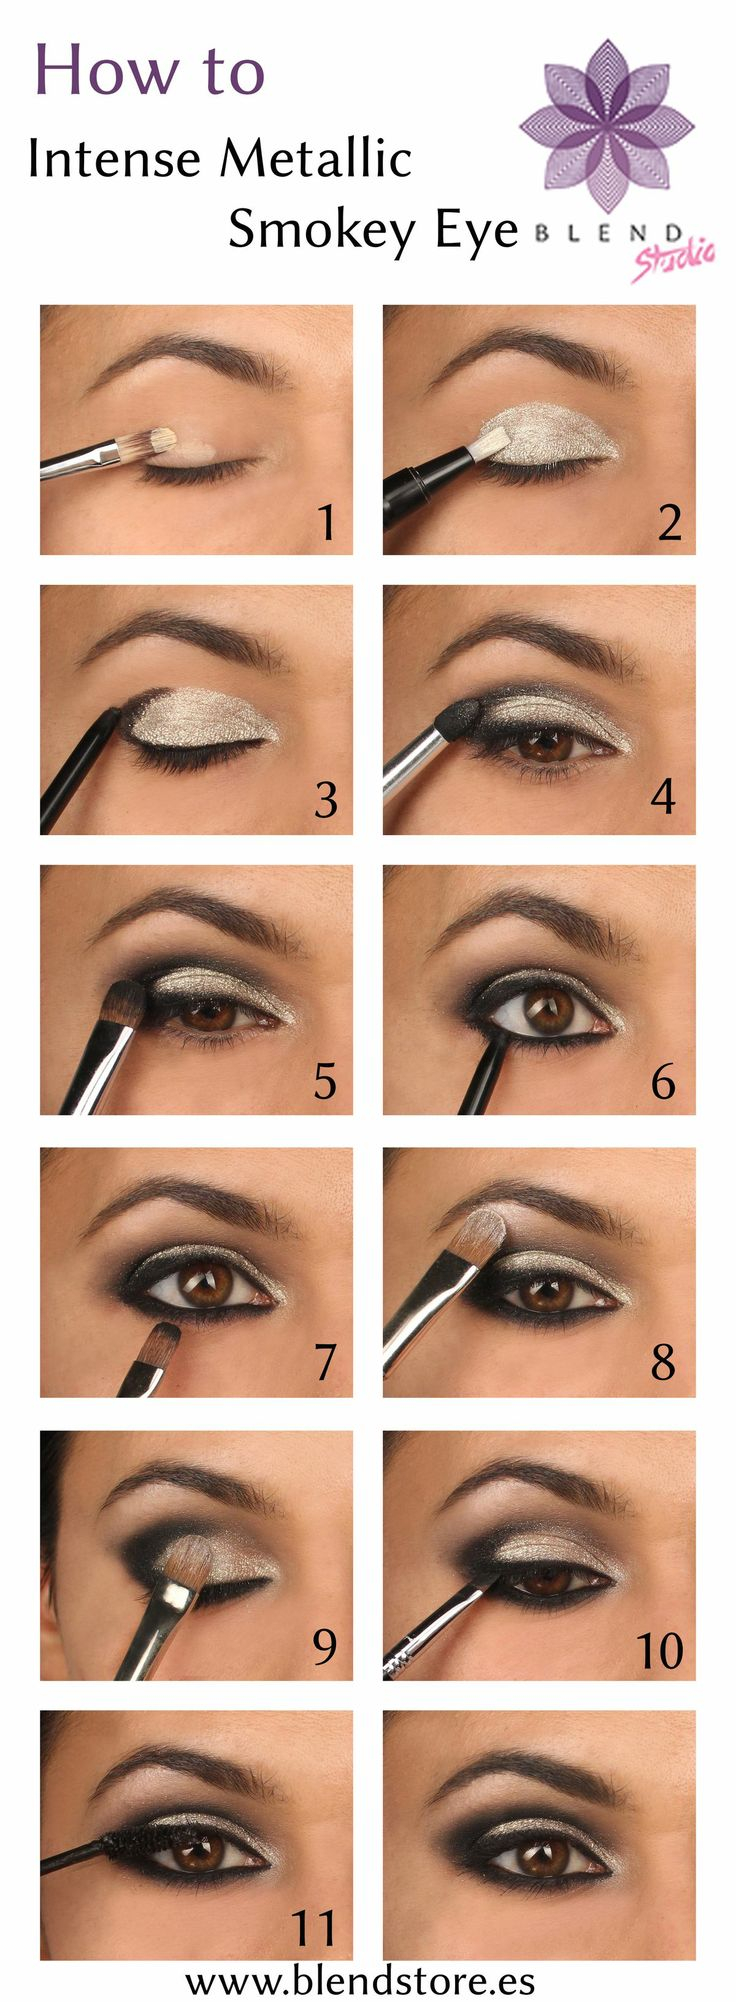 Eye Makeup Step By Step Instructions With Pictures 15 Smokey Eye Tutorials Step Step Guide To Perfect Hollywood Makeup